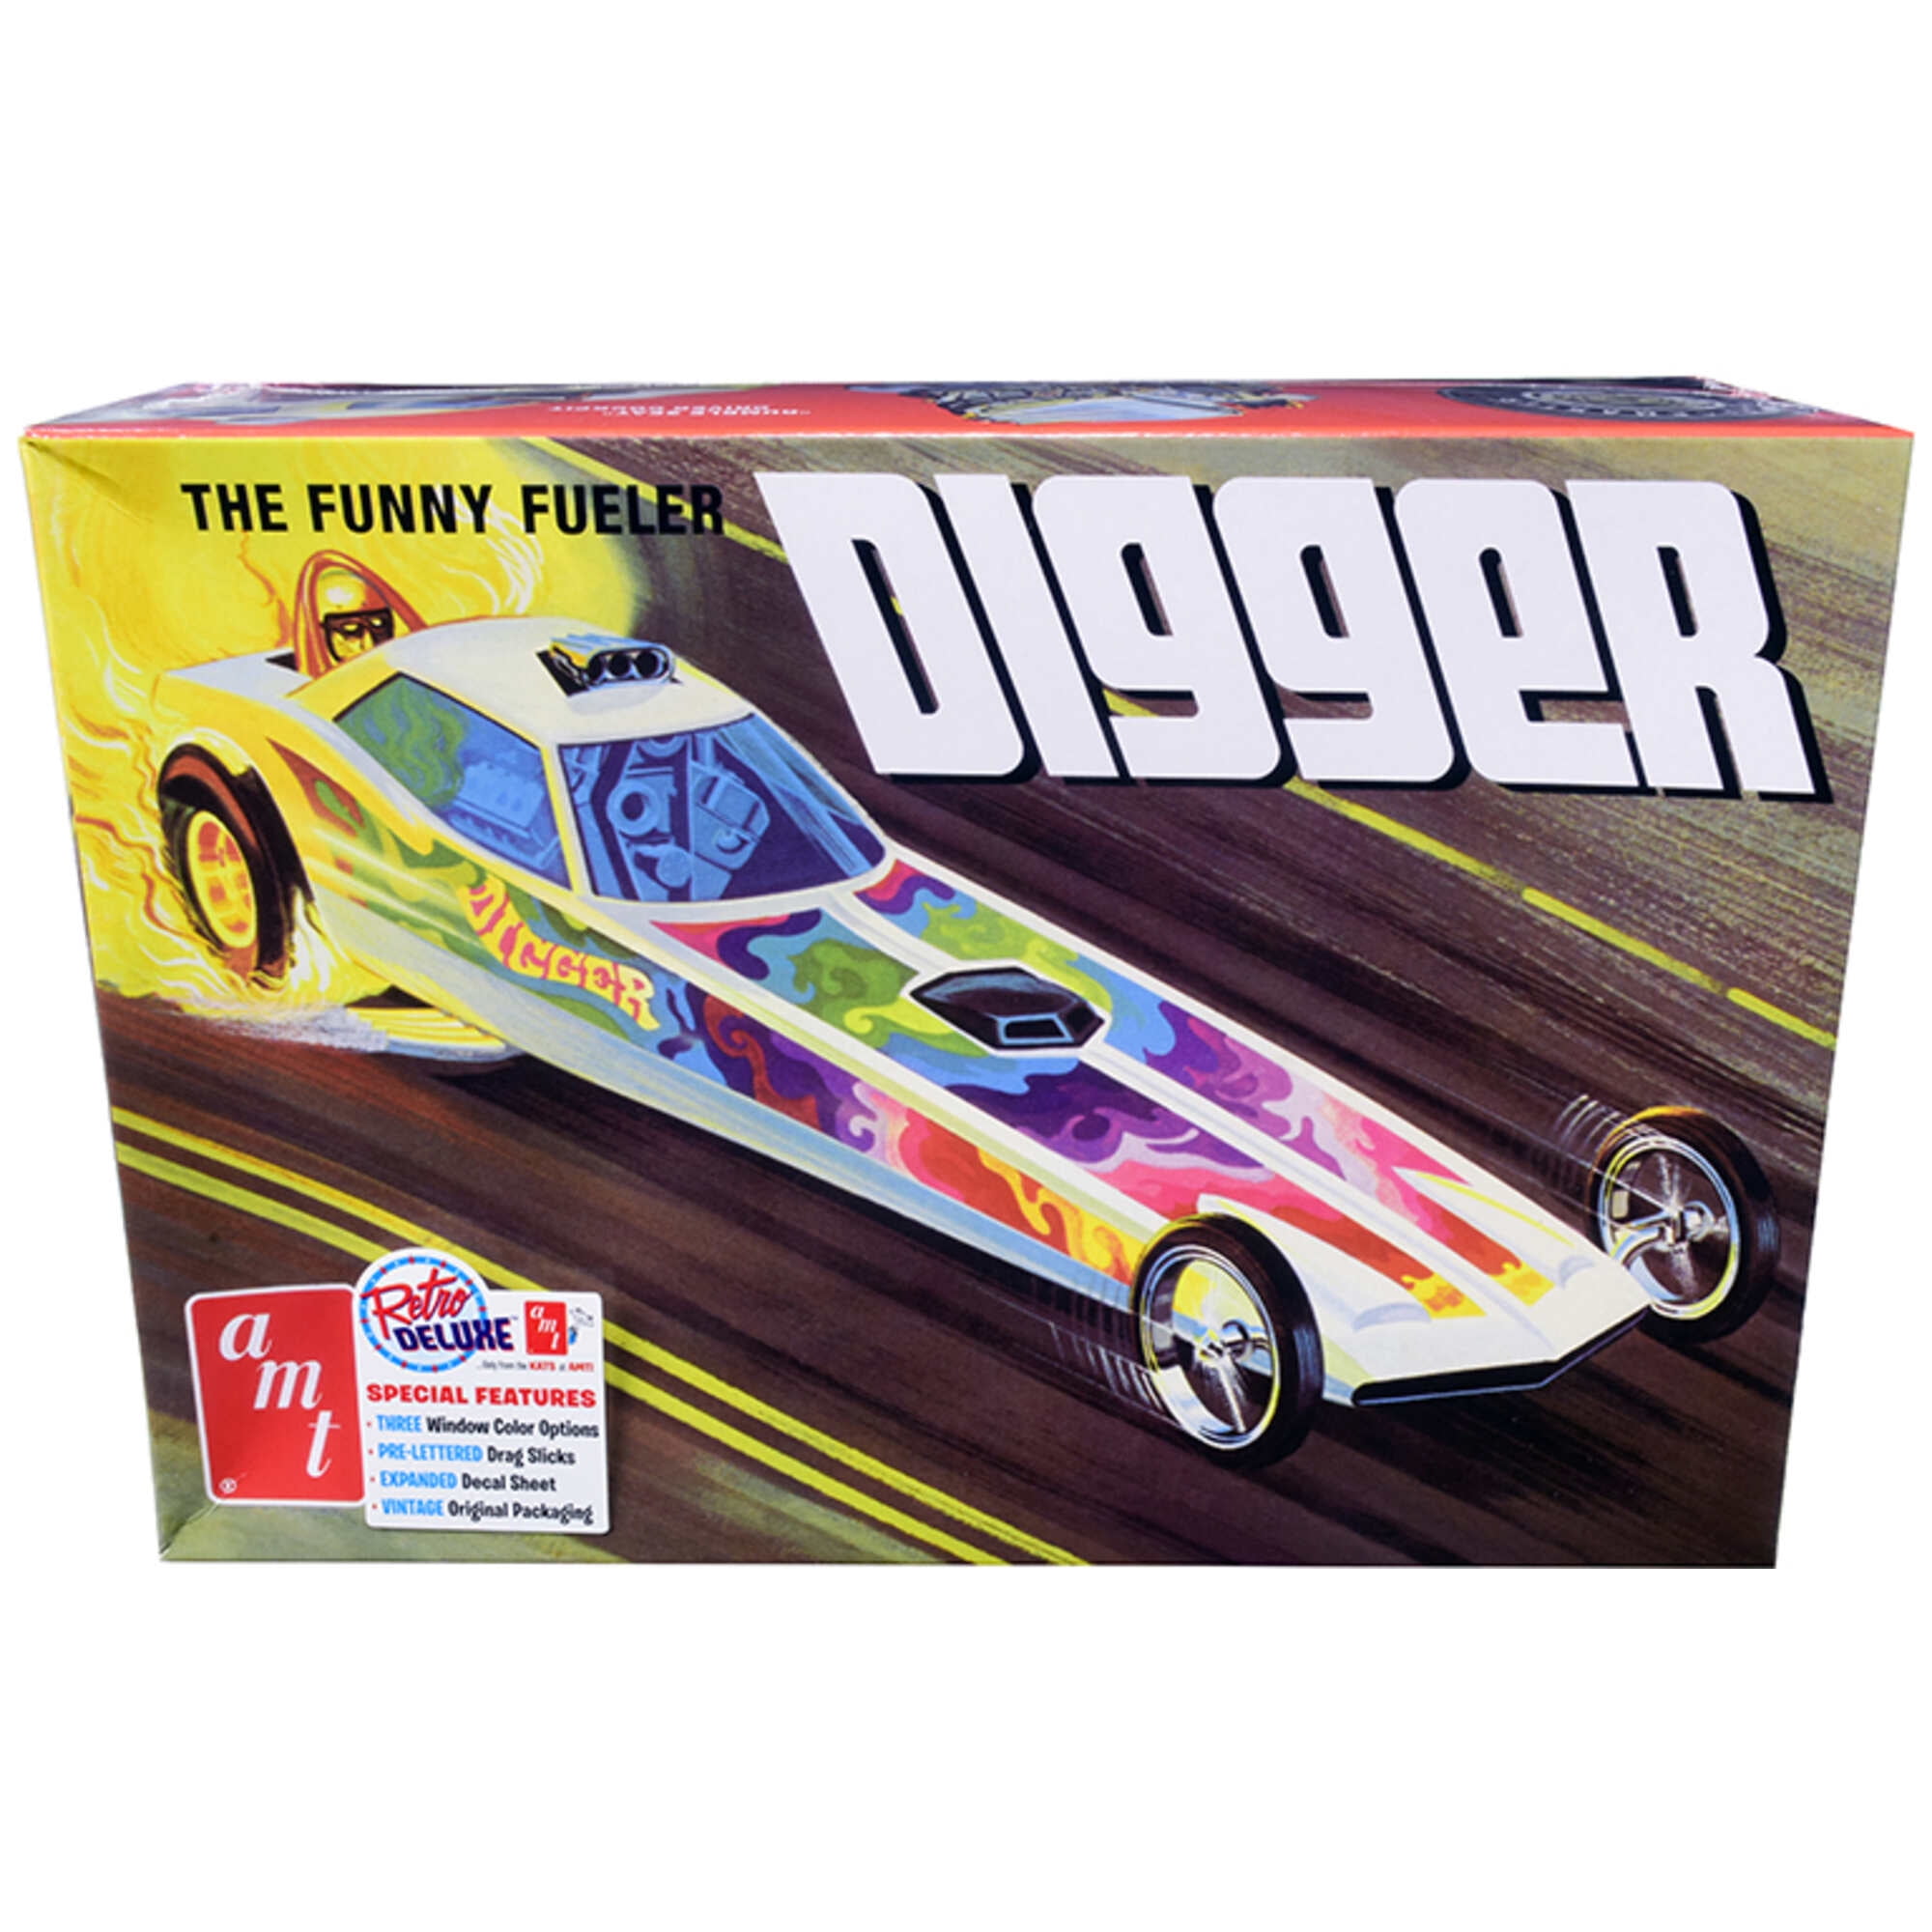 Picture of AMT AMT1154 Skill 2 Model Kit Digger Dragster The Funny Fueler 1 by 25 Scale Model